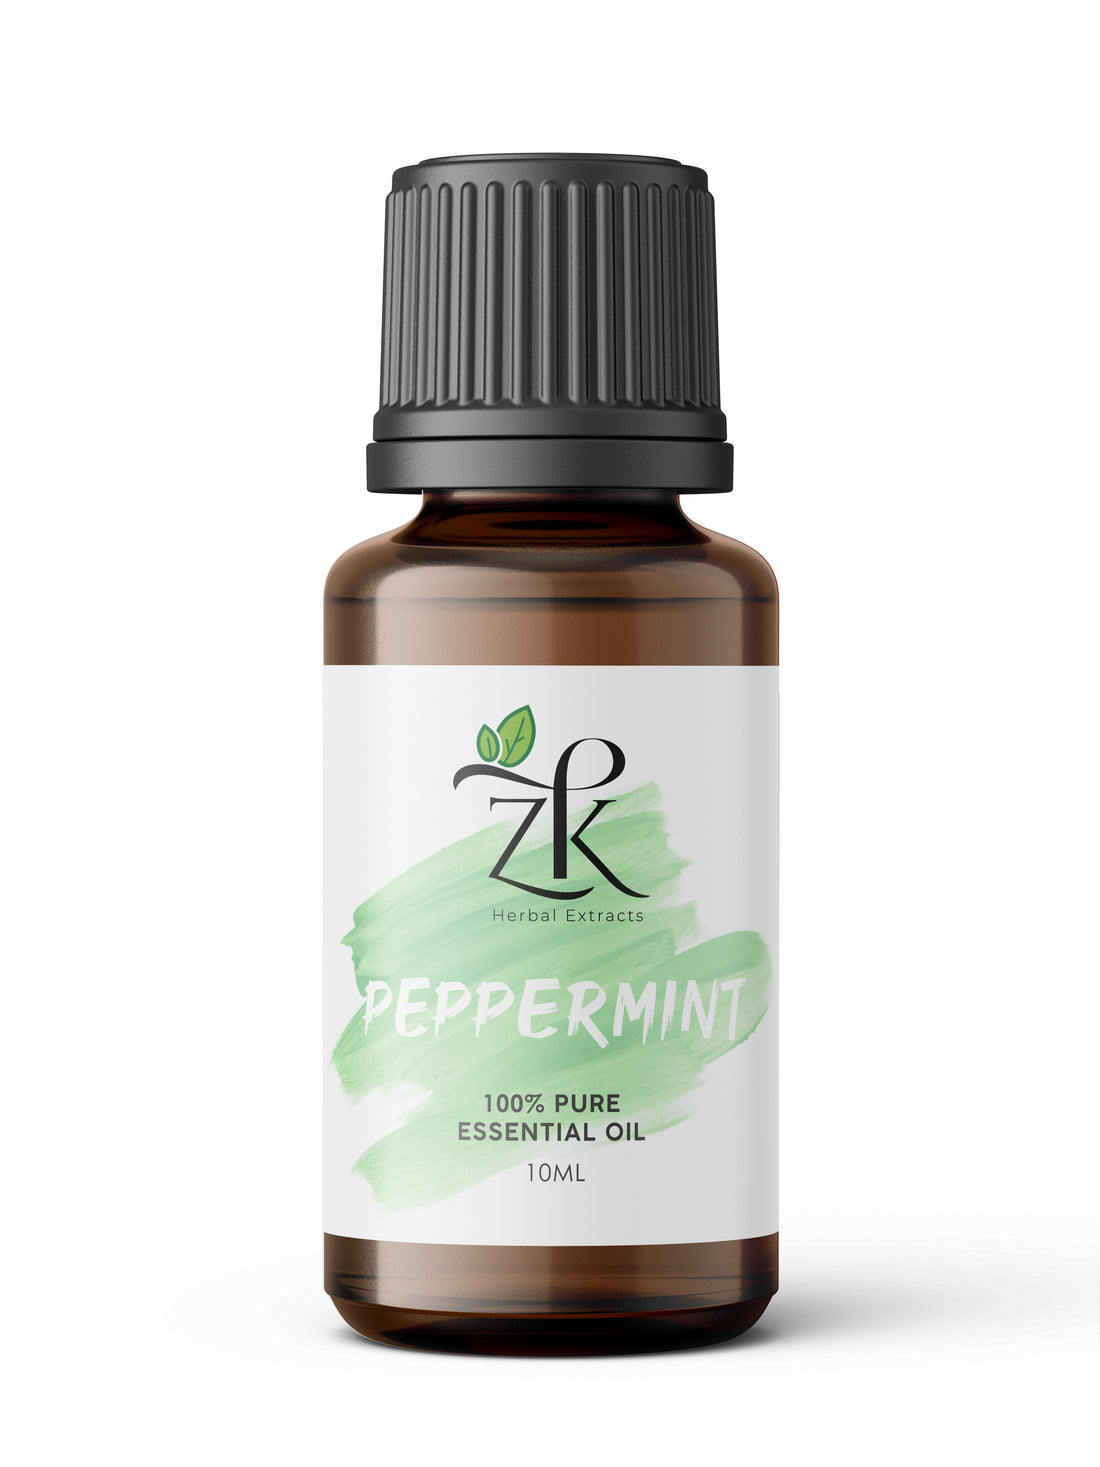 ZK Peppermint Essential Oil 10mL